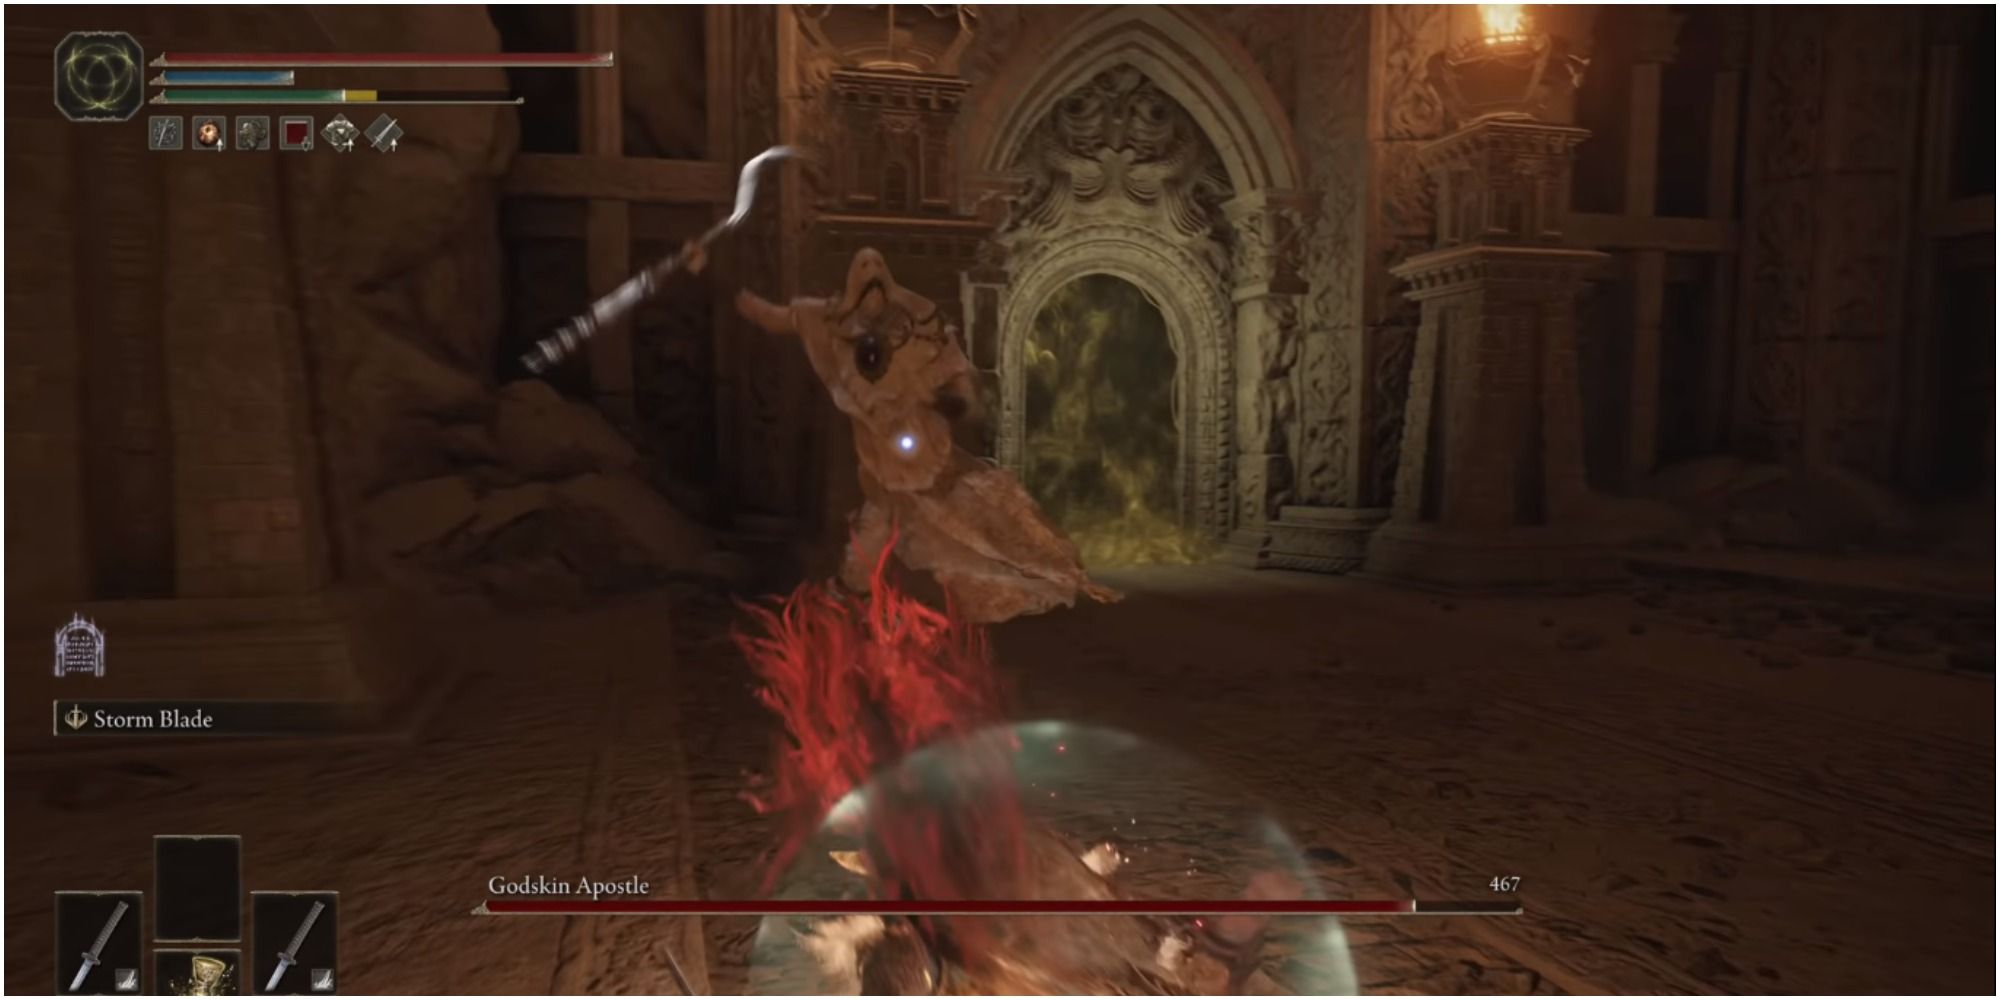 The boss about to slash the player with his Twinblade.